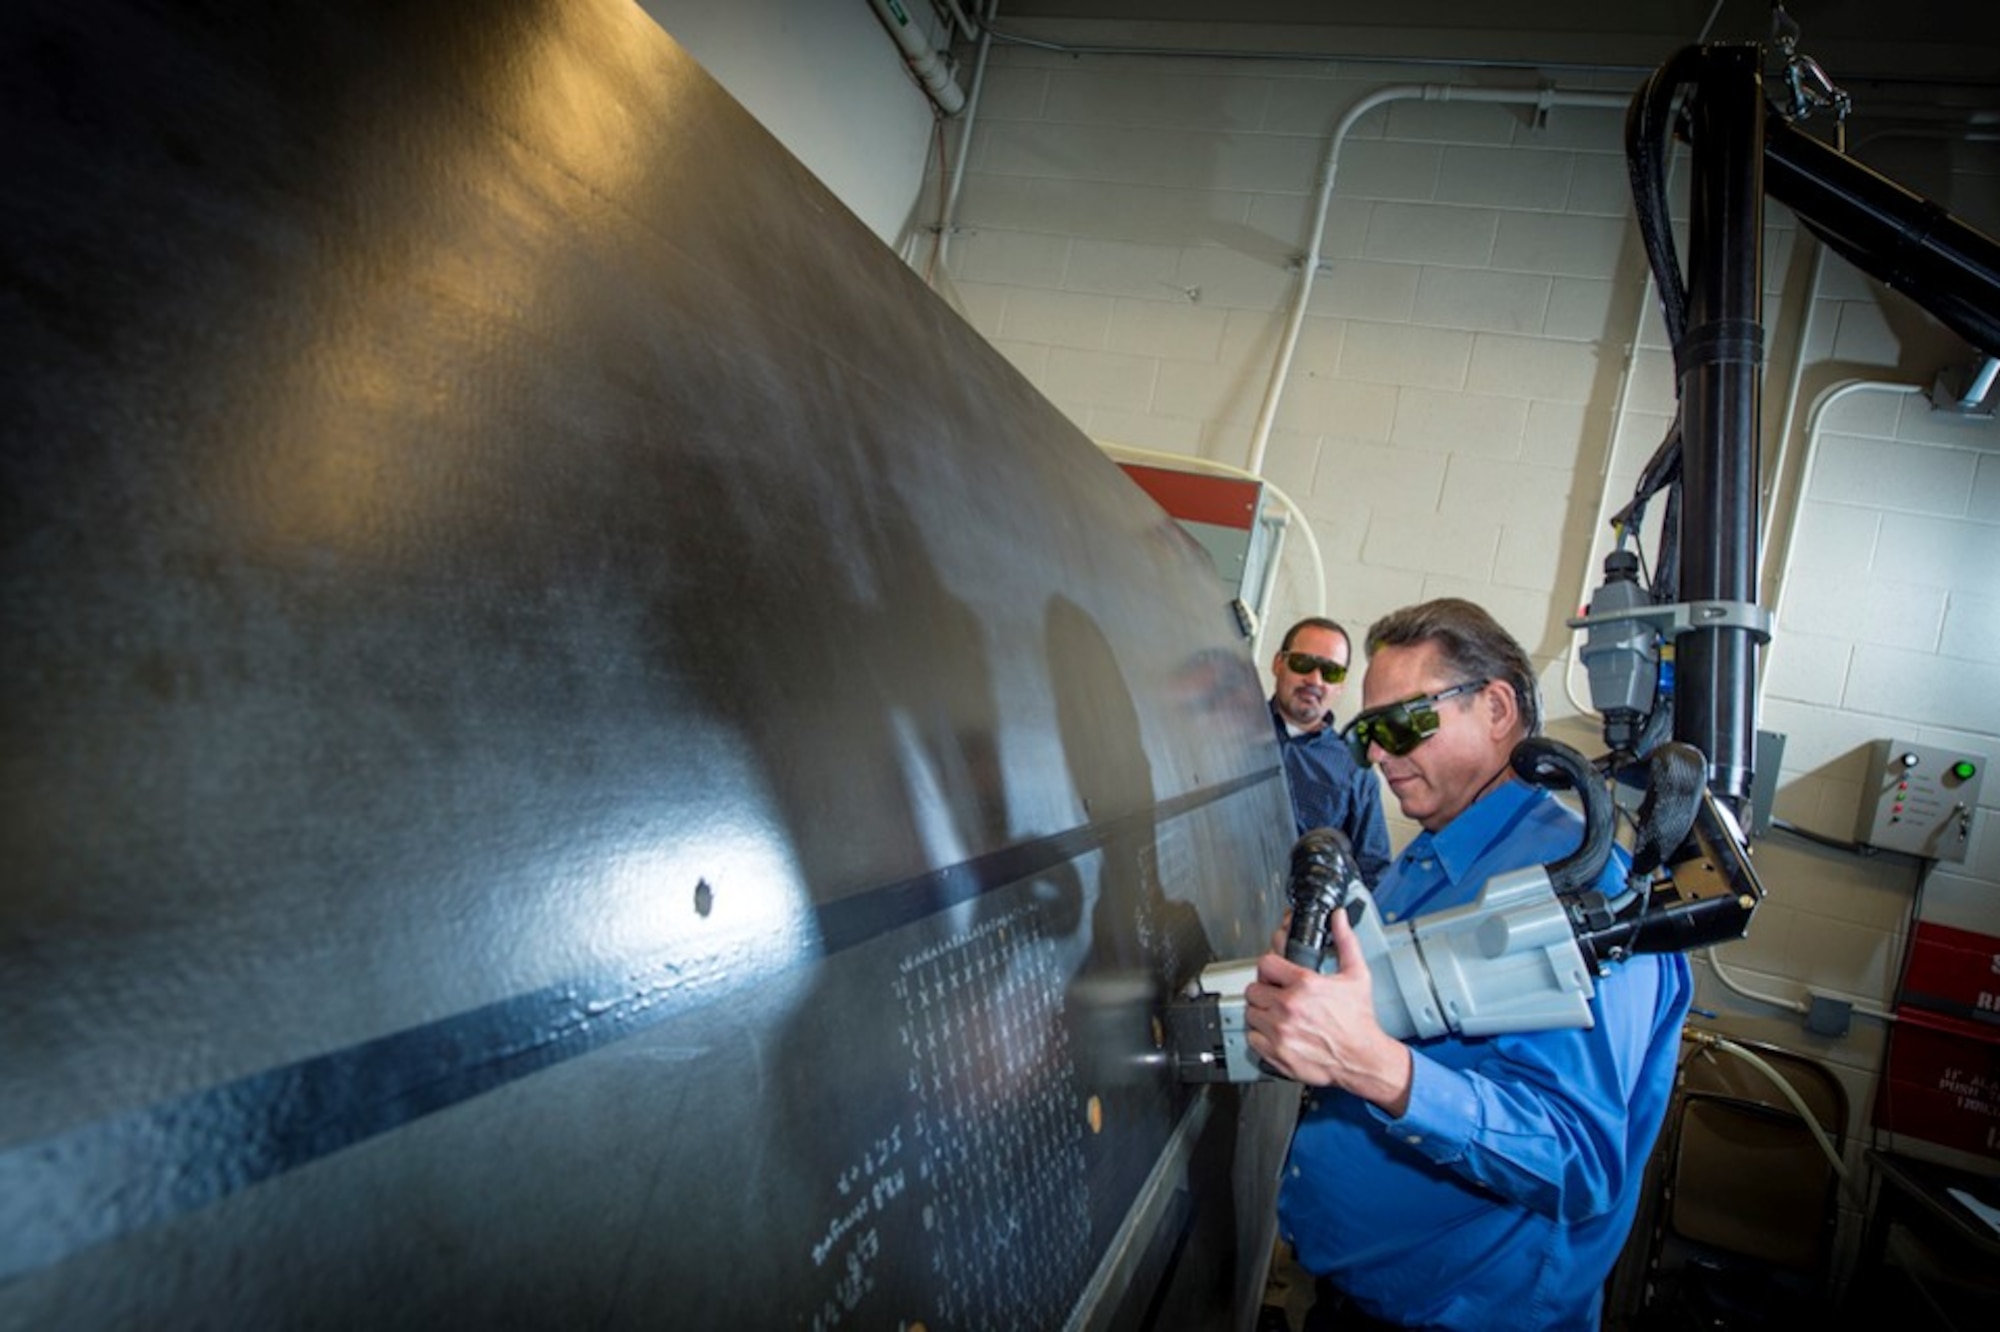 A researcher uses Laser Bond Inspection on a large structure at the Boeing Laser Bond Inspection Laboratory in Seattle, Washington. (Courtesy photo)